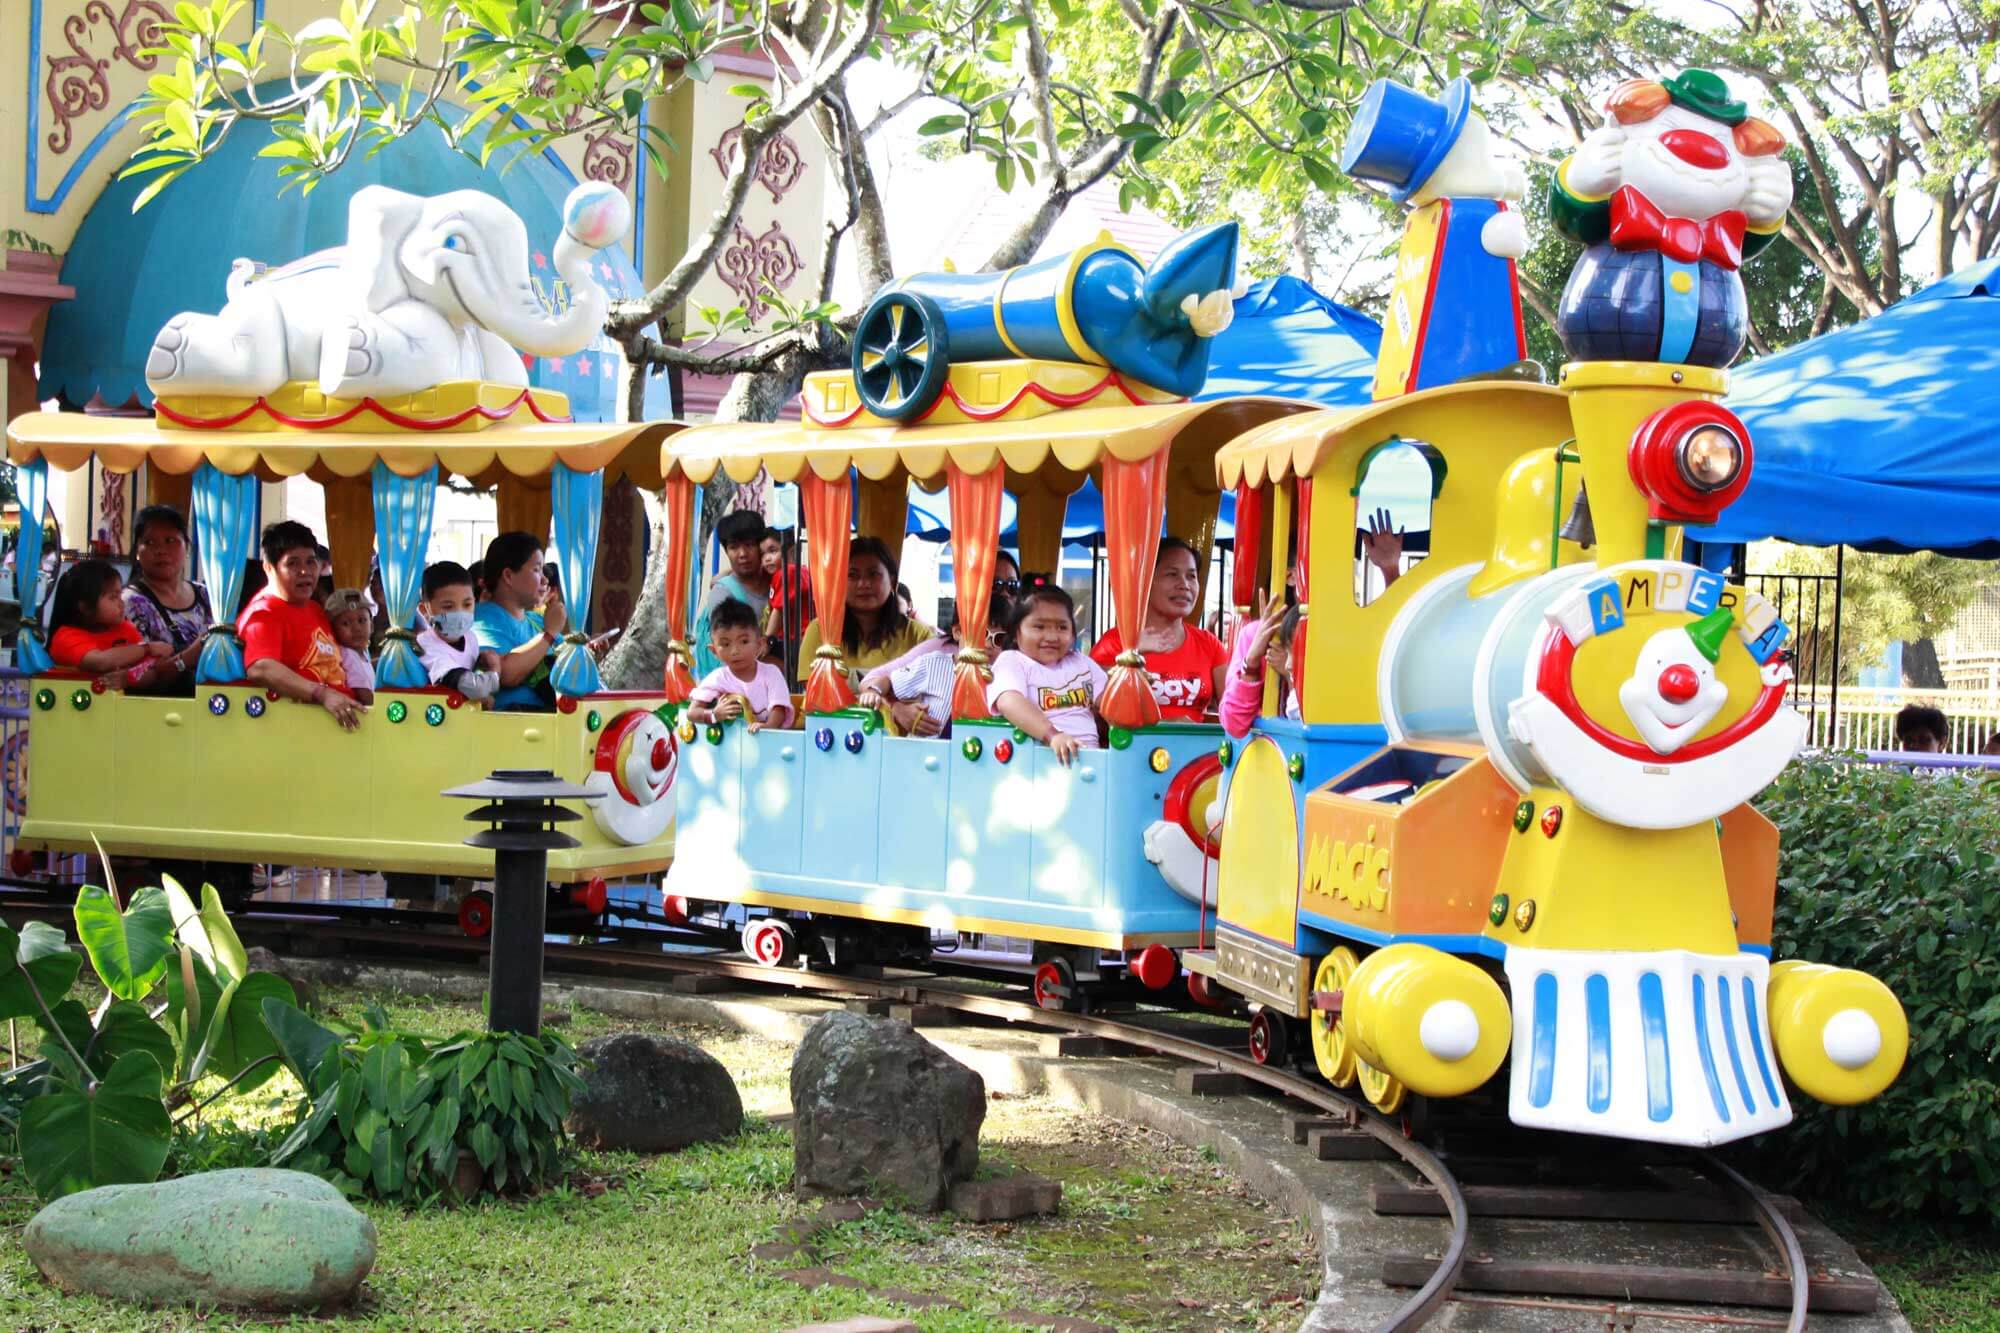 The Enchanted Kingdom is located in Santa Rosa